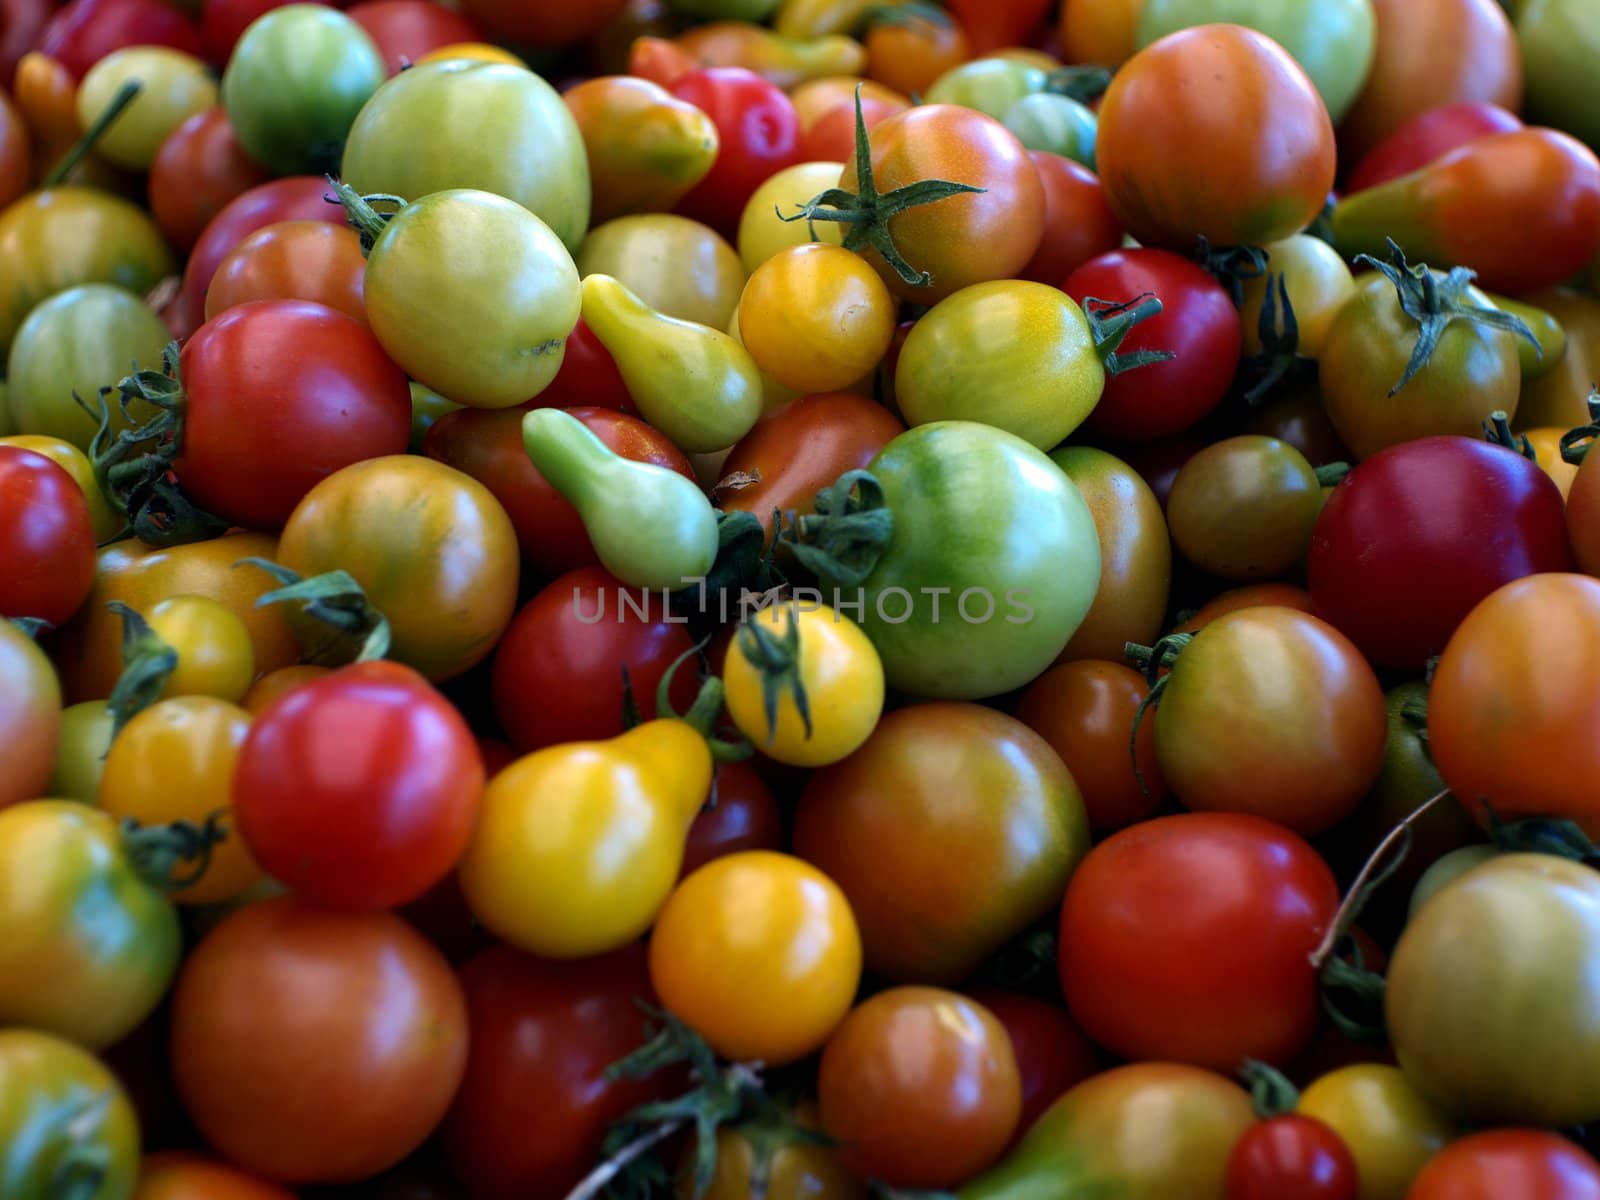 Mixed color tomatoes.